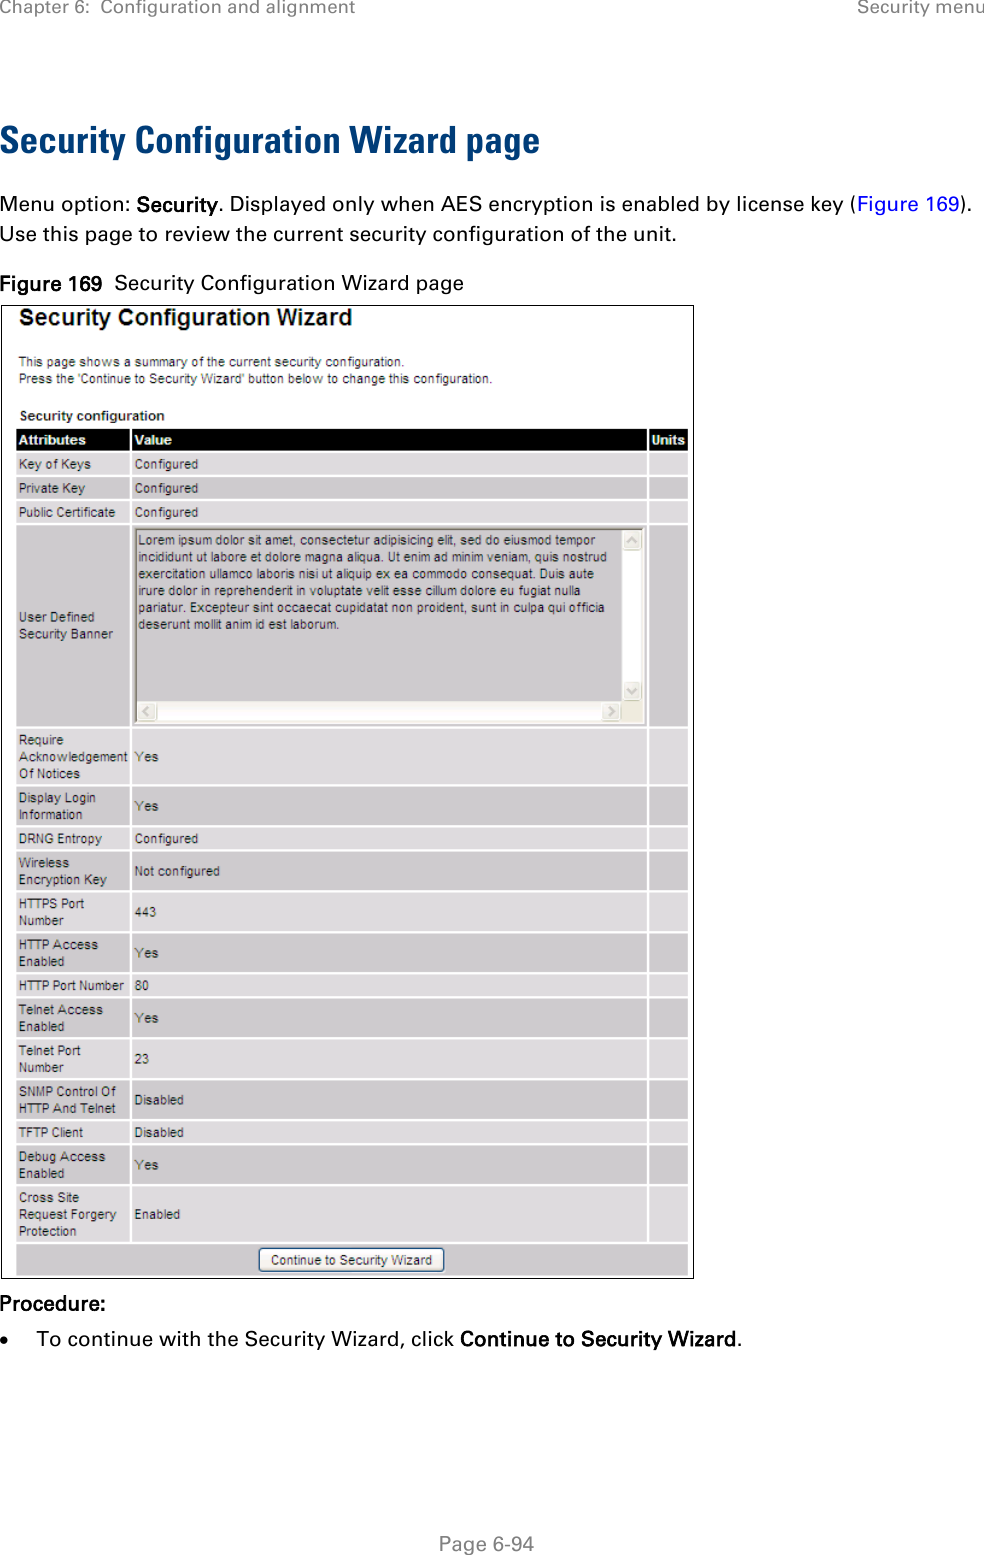 Chapter 6:  Configuration and alignment Security menu  Security Configuration Wizard page Menu option: Security. Displayed only when AES encryption is enabled by license key (Figure 169). Use this page to review the current security configuration of the unit. Figure 169  Security Configuration Wizard page  Procedure: • To continue with the Security Wizard, click Continue to Security Wizard.   Page 6-94 